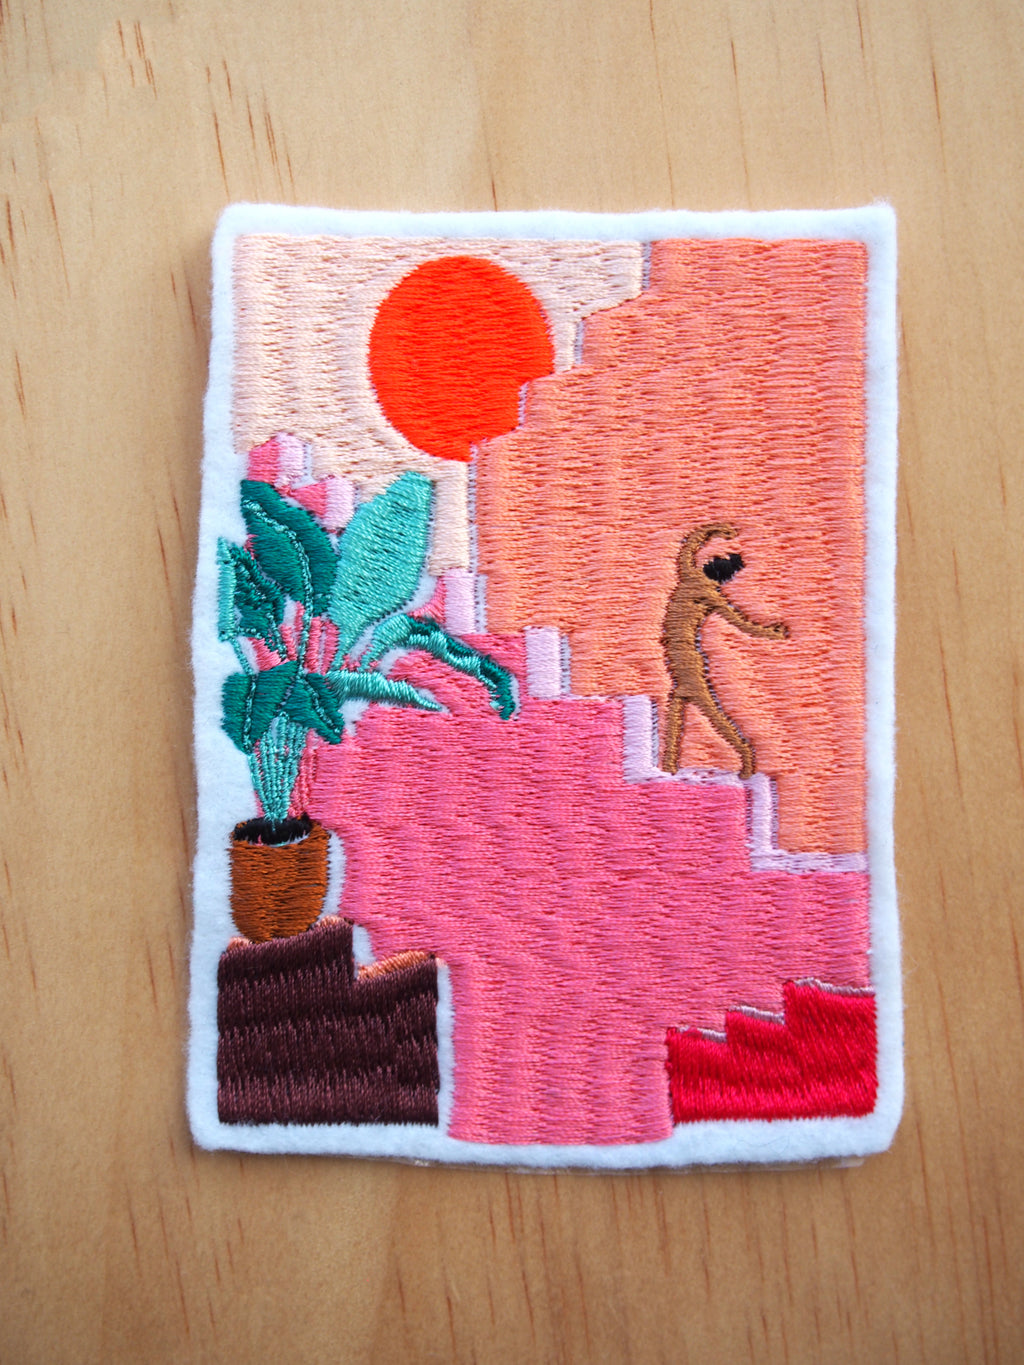 Pink stairs embroidery (almost perfect)